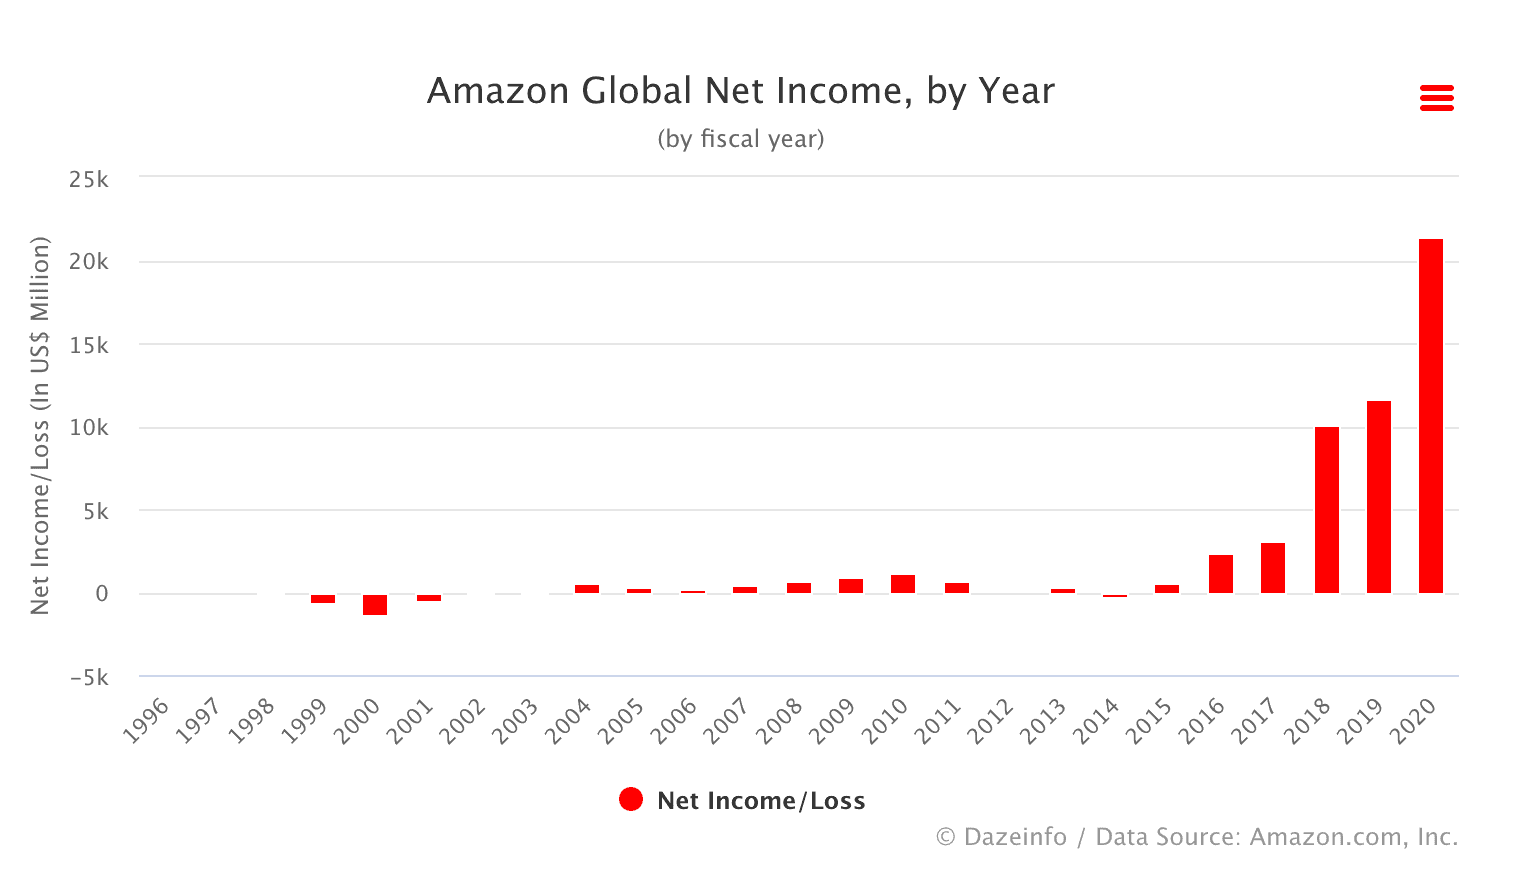 Amazon Global Net Income by year graph